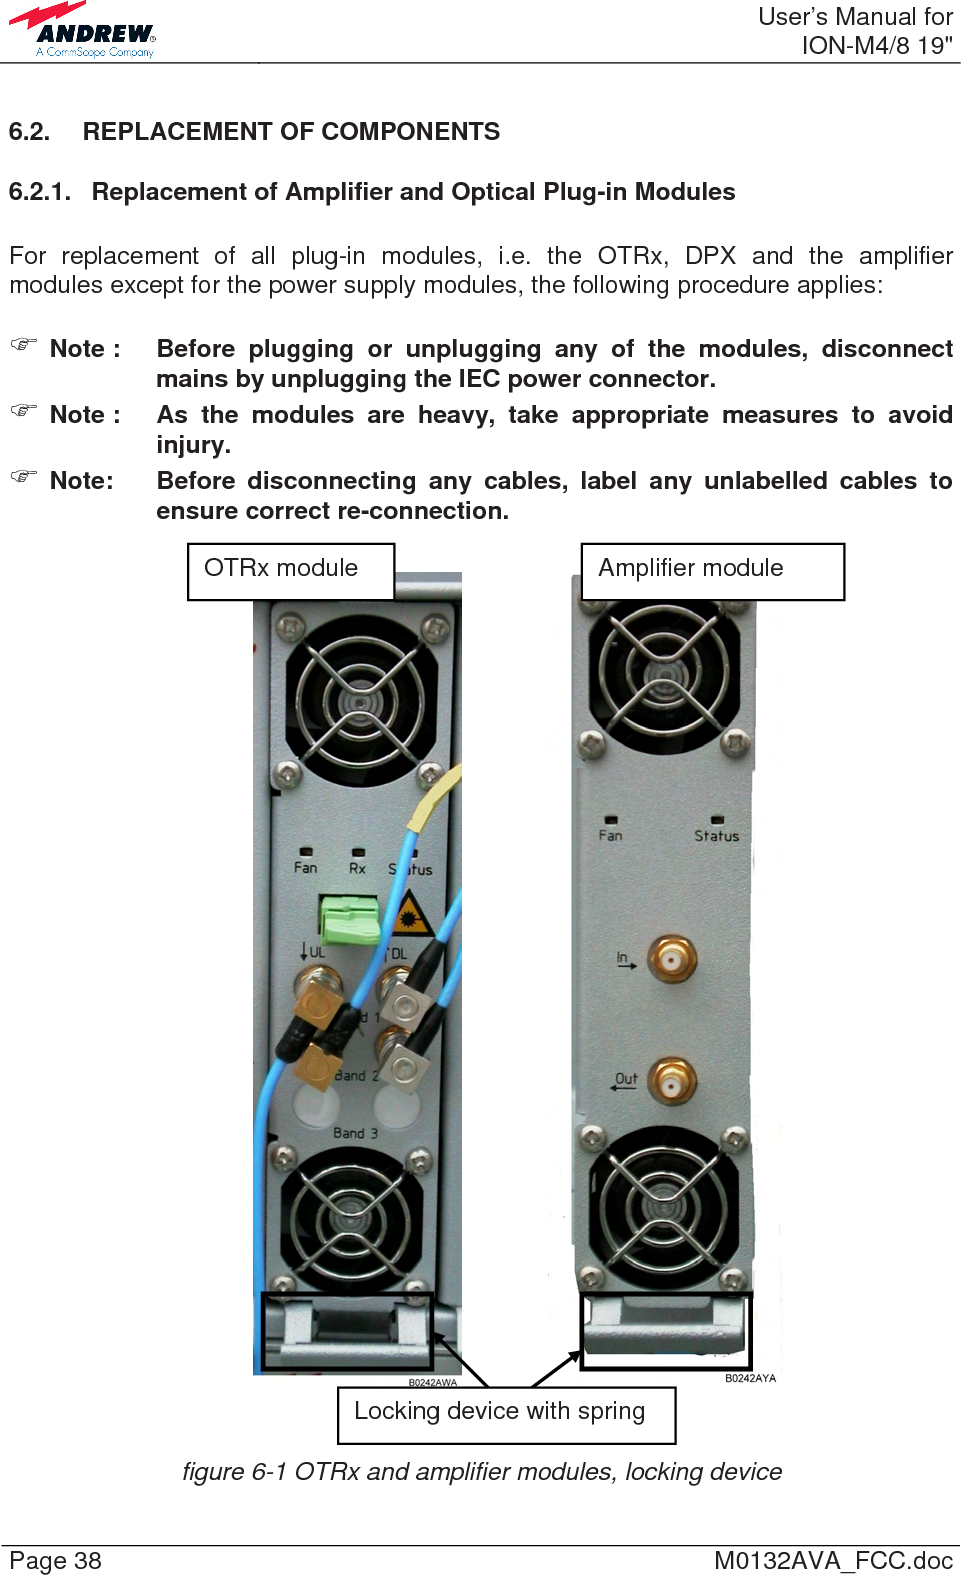  User’s Manual forION-M4/8 19&quot; Page 38  M0132AVA_FCC.doc 6.2. REPLACEMENT OF COMPONENTS 6.2.1.  Replacement of Amplifier and Optical Plug-in Modules  For replacement of all plug-in modules, i.e. the OTRx, DPX and the amplifier modules except for the power supply modules, the following procedure applies:   ) Note :  Before plugging or unplugging any of the modules, disconnect mains by unplugging the IEC power connector. ) Note :  As the modules are heavy, take appropriate measures to avoid injury. ) Note:  Before disconnecting any cables, label any unlabelled cables to ensure correct re-connection.        figure 6-1 OTRx and amplifier modules, locking device Locking device with spring OTRx module  Amplifier module 